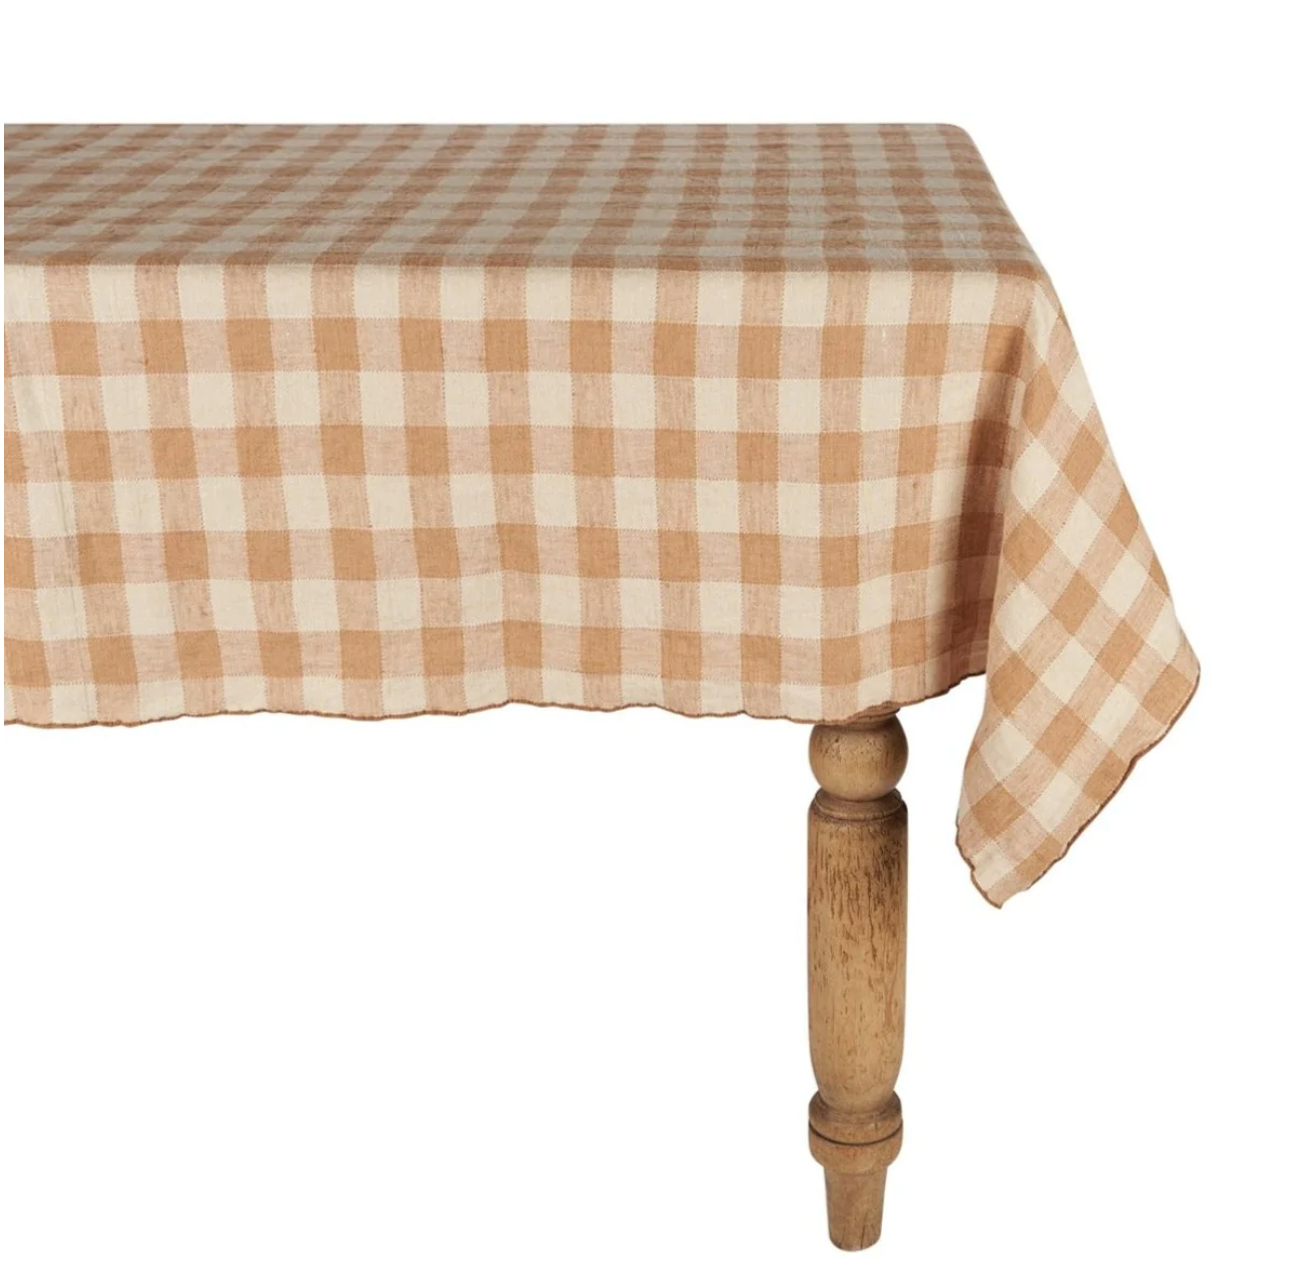 Terracotta Gingham Tablecloth